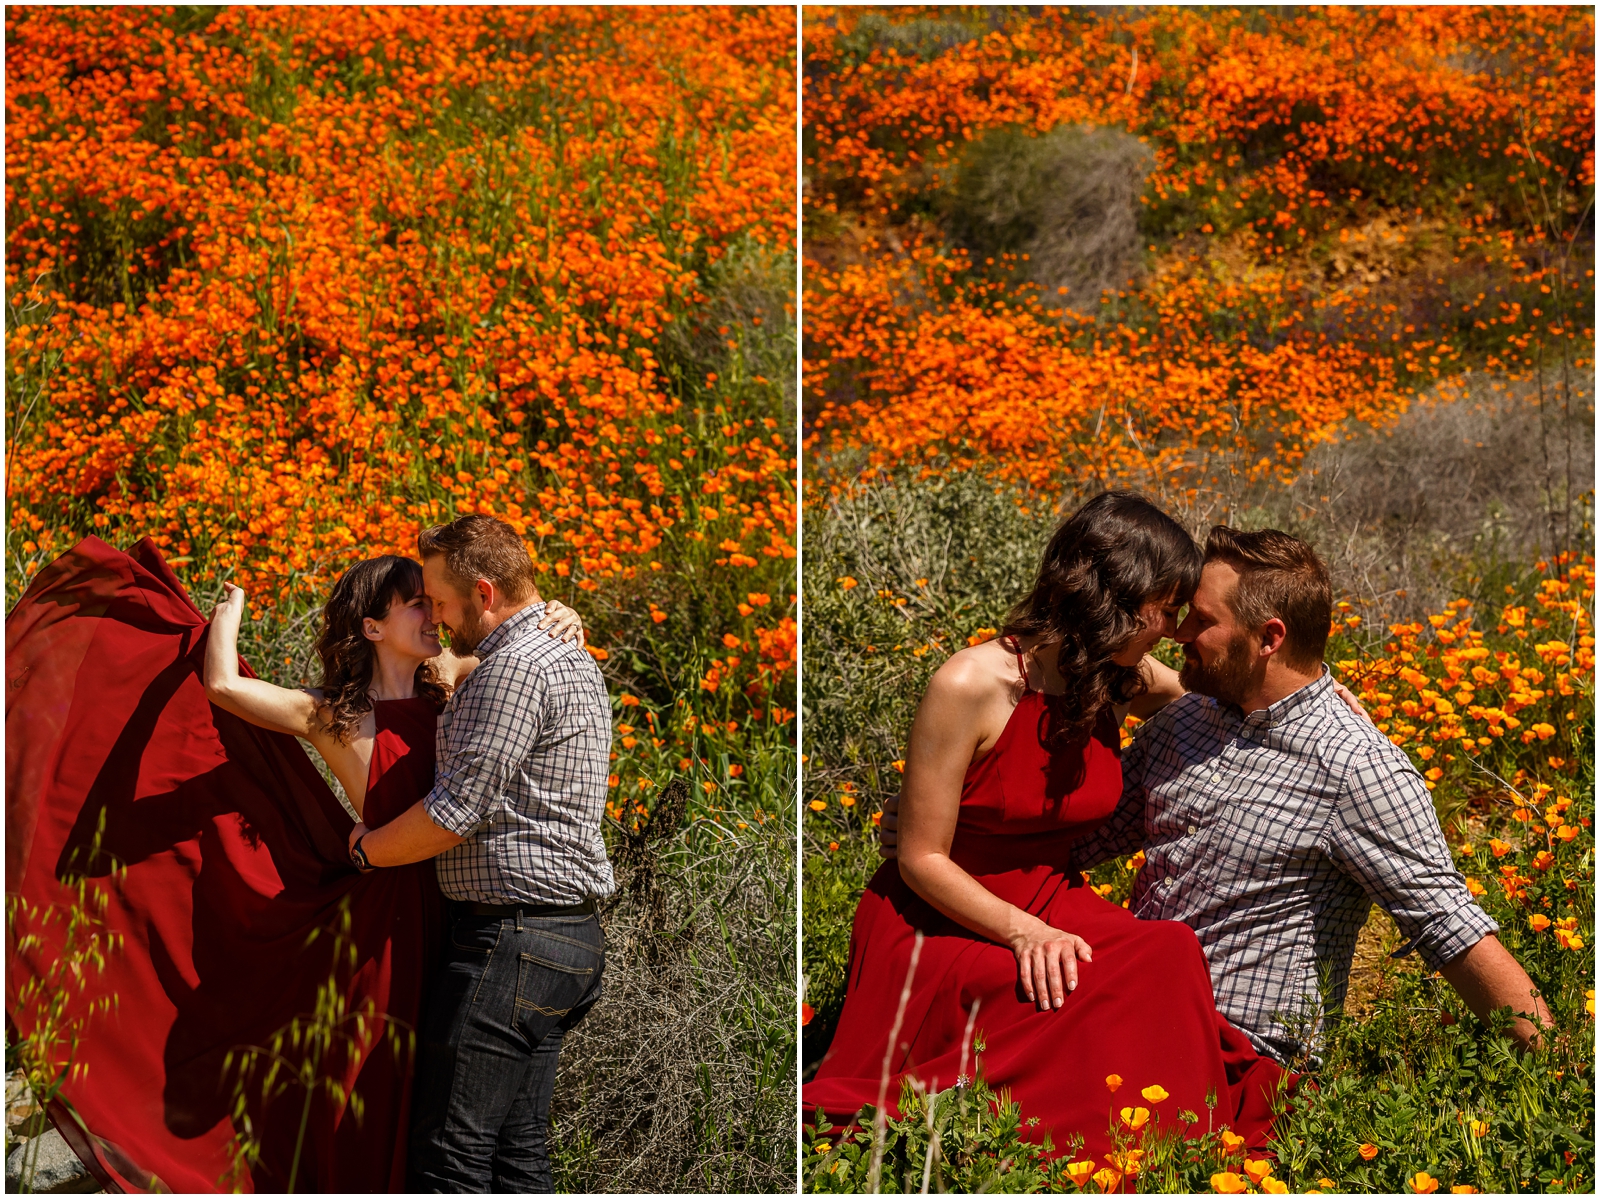 Engagement session in California poppies fields